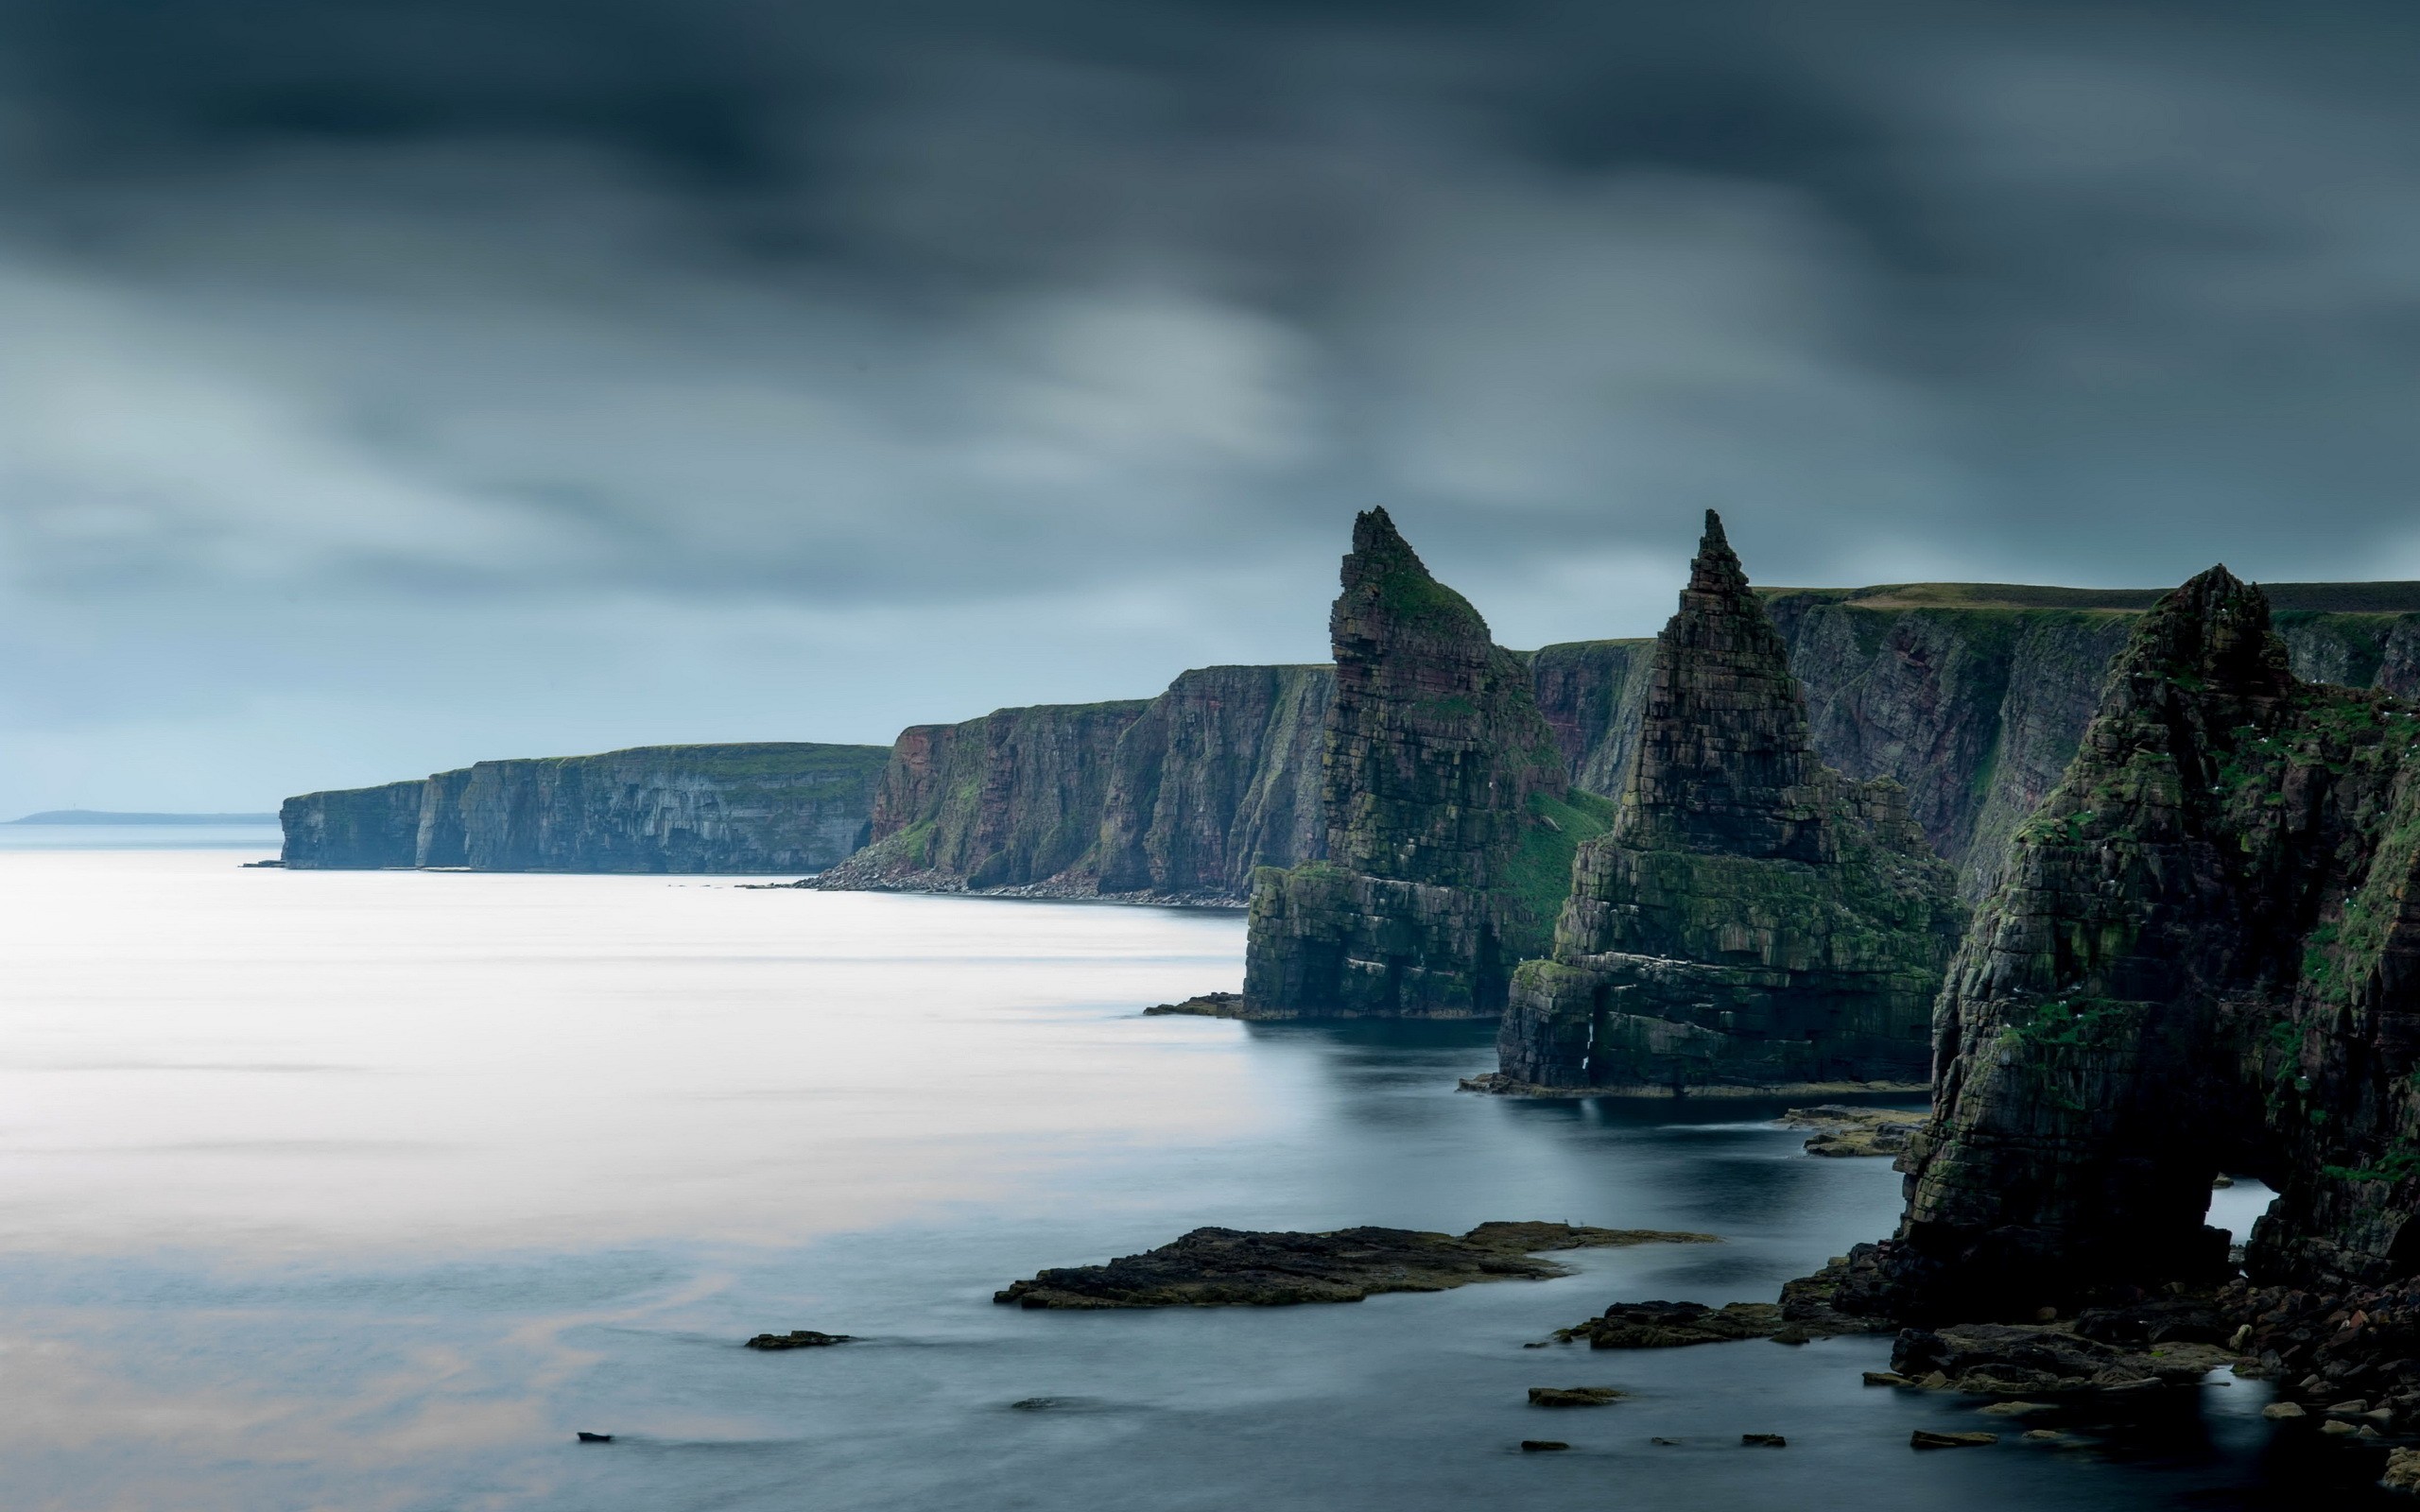 General 2560x1600 coast rocks nature sea Scotland cliff Duncansby Stacks landscape water